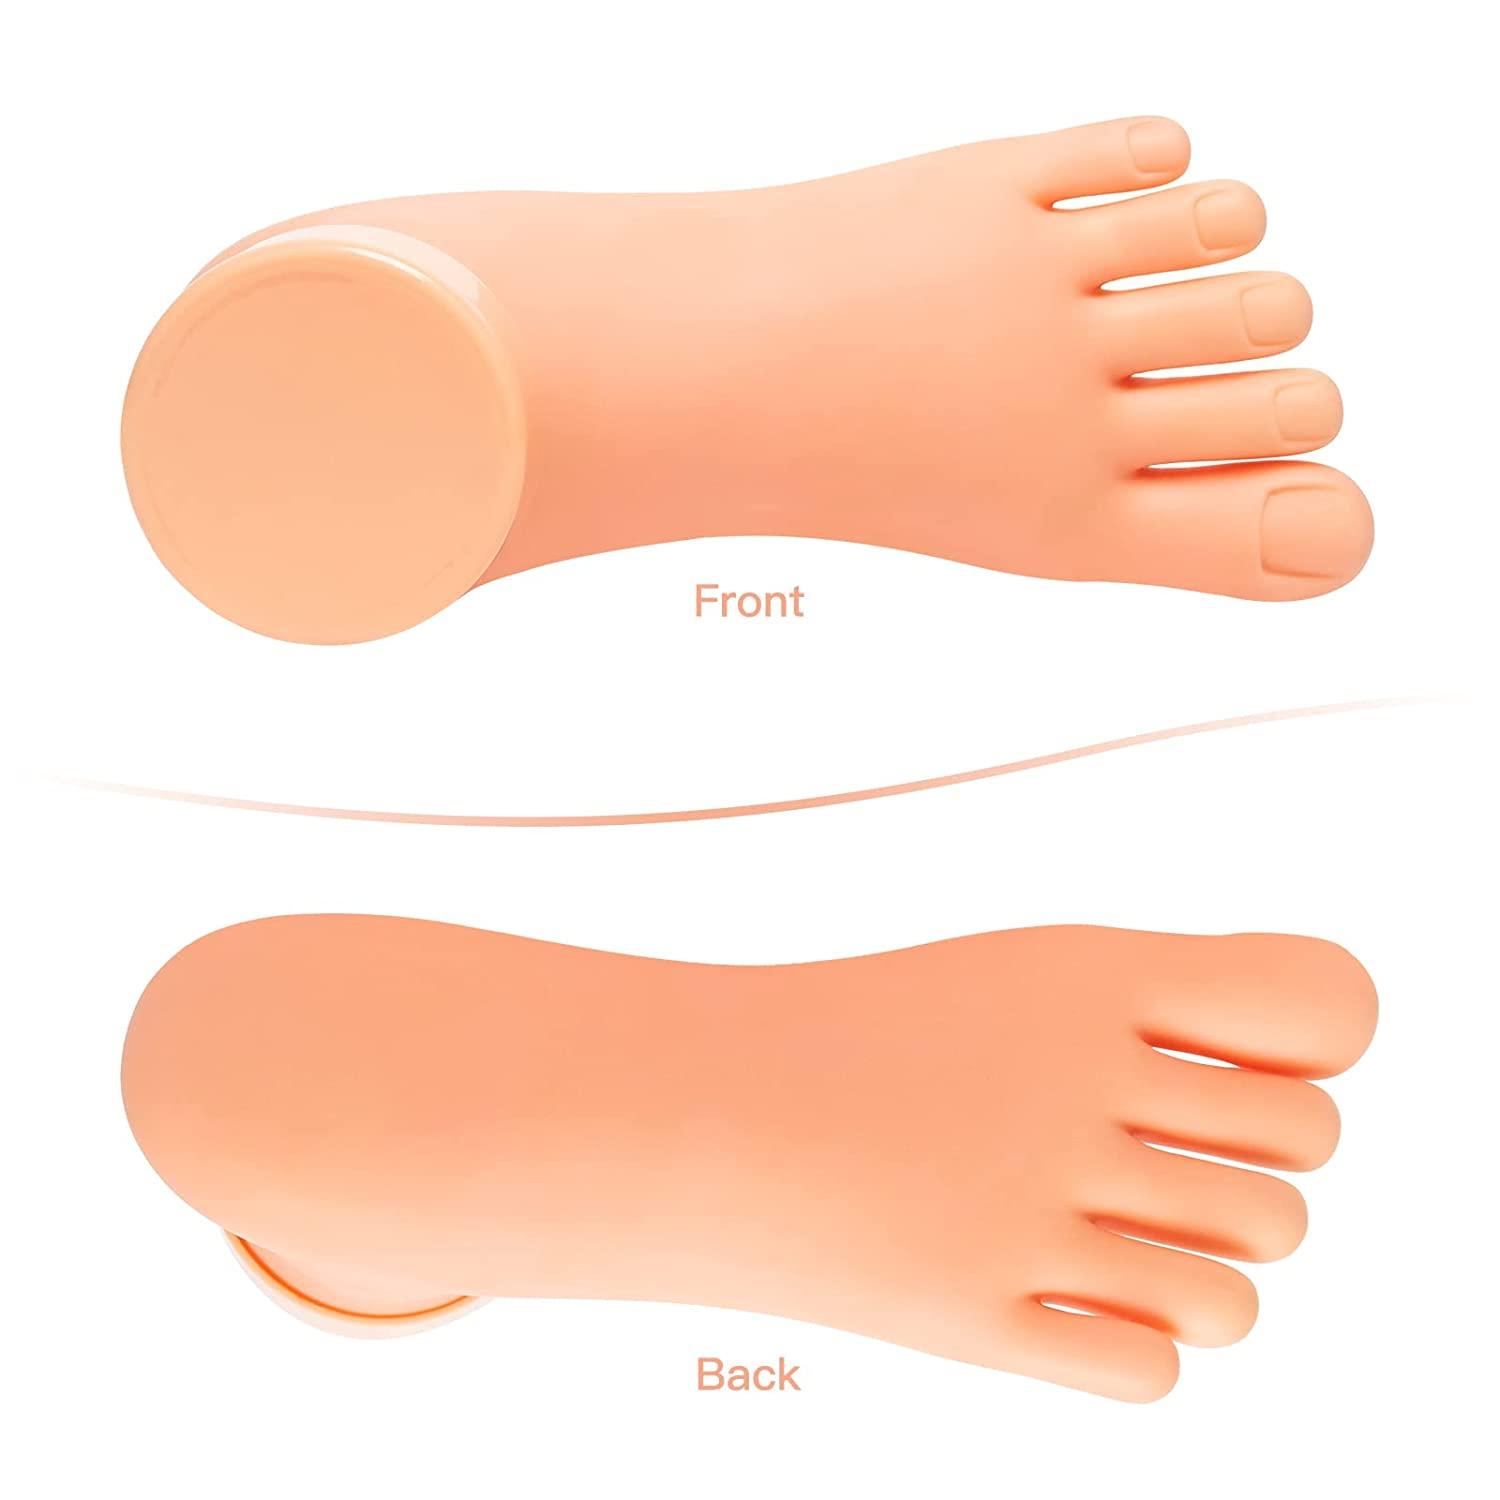 Silicone Feet Soft Fake Feet for Practice Tattooing